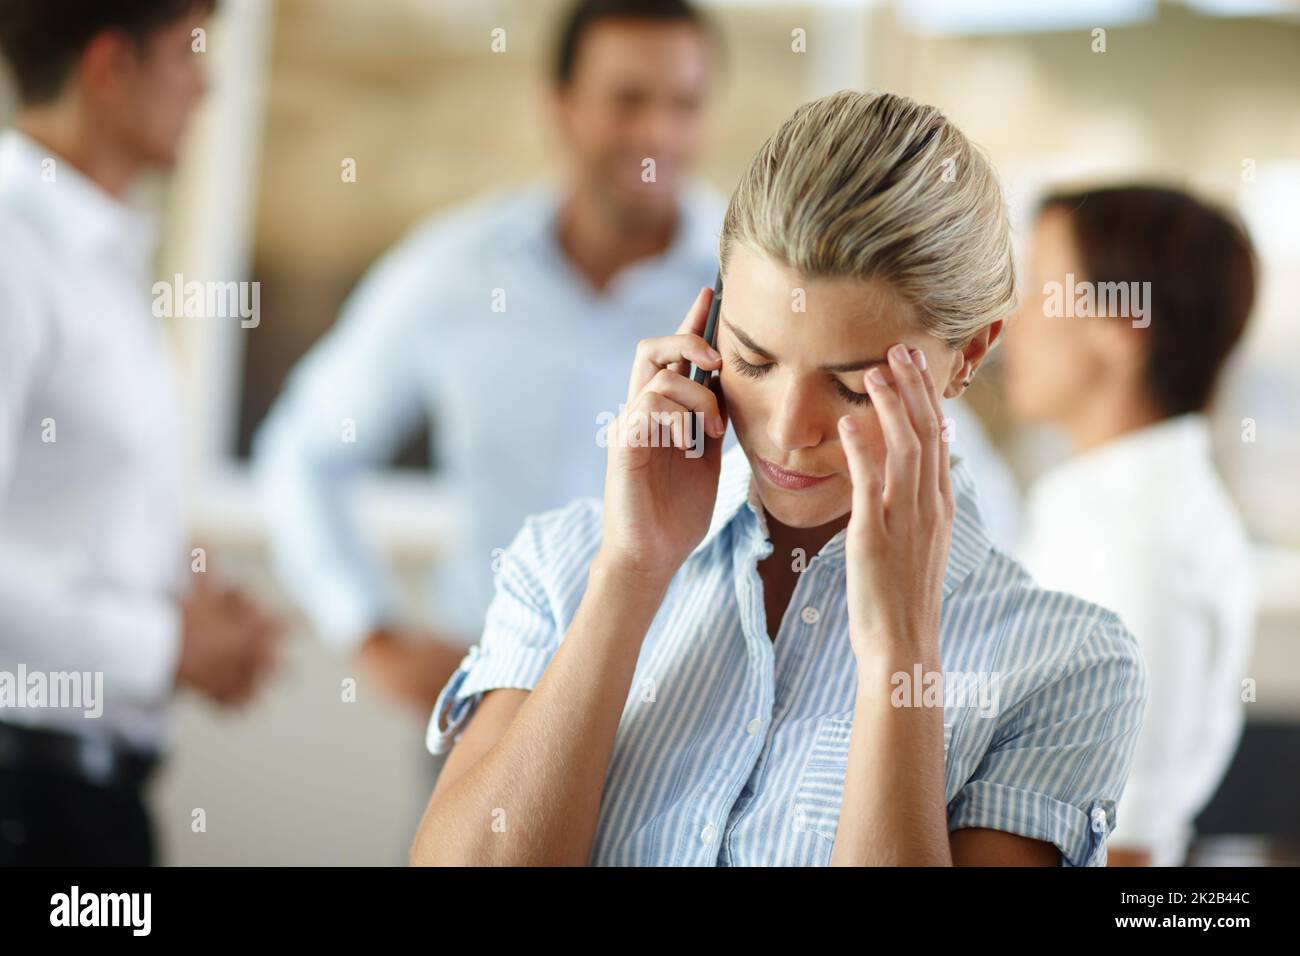 Things just arent going her way today. Shot of a young businesswoman looking dismayed after receiving bad news on the phone. Stock Photo